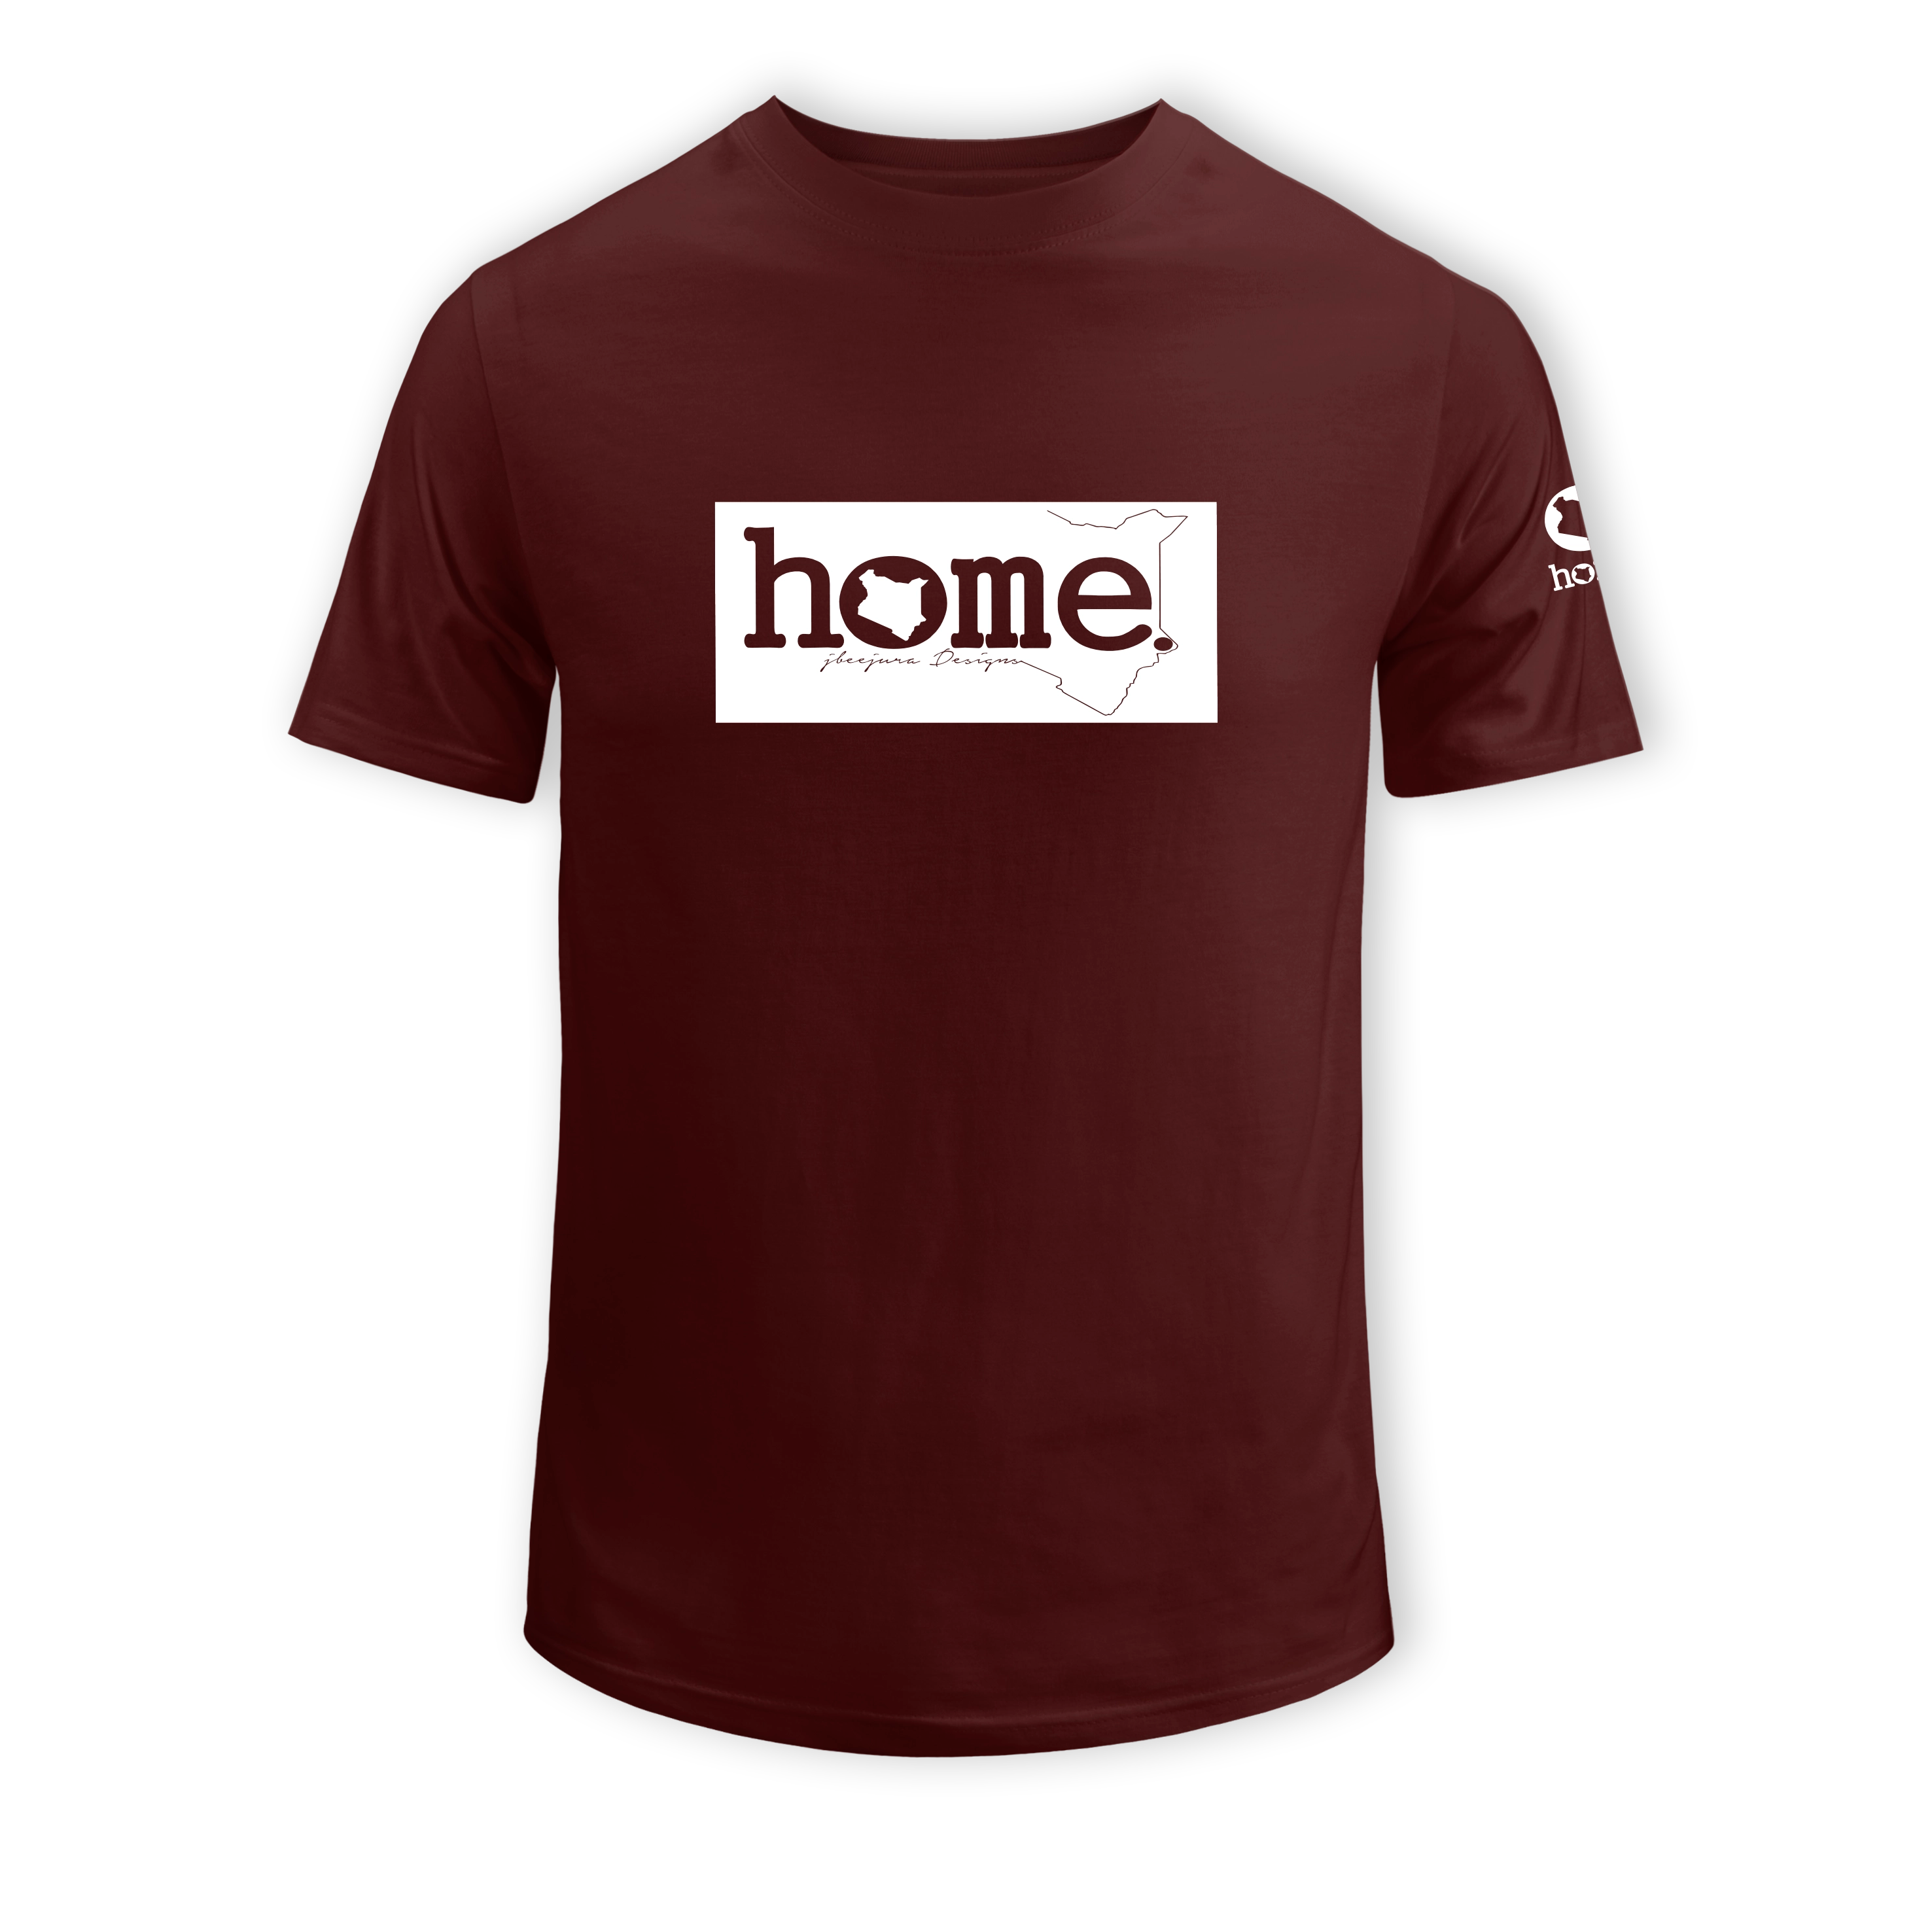 home_254 SHORT-SLEEVED MAROON T-SHIRT WITH A WHITE CLASSIC PRINT – COTTON PLUS FABRIC